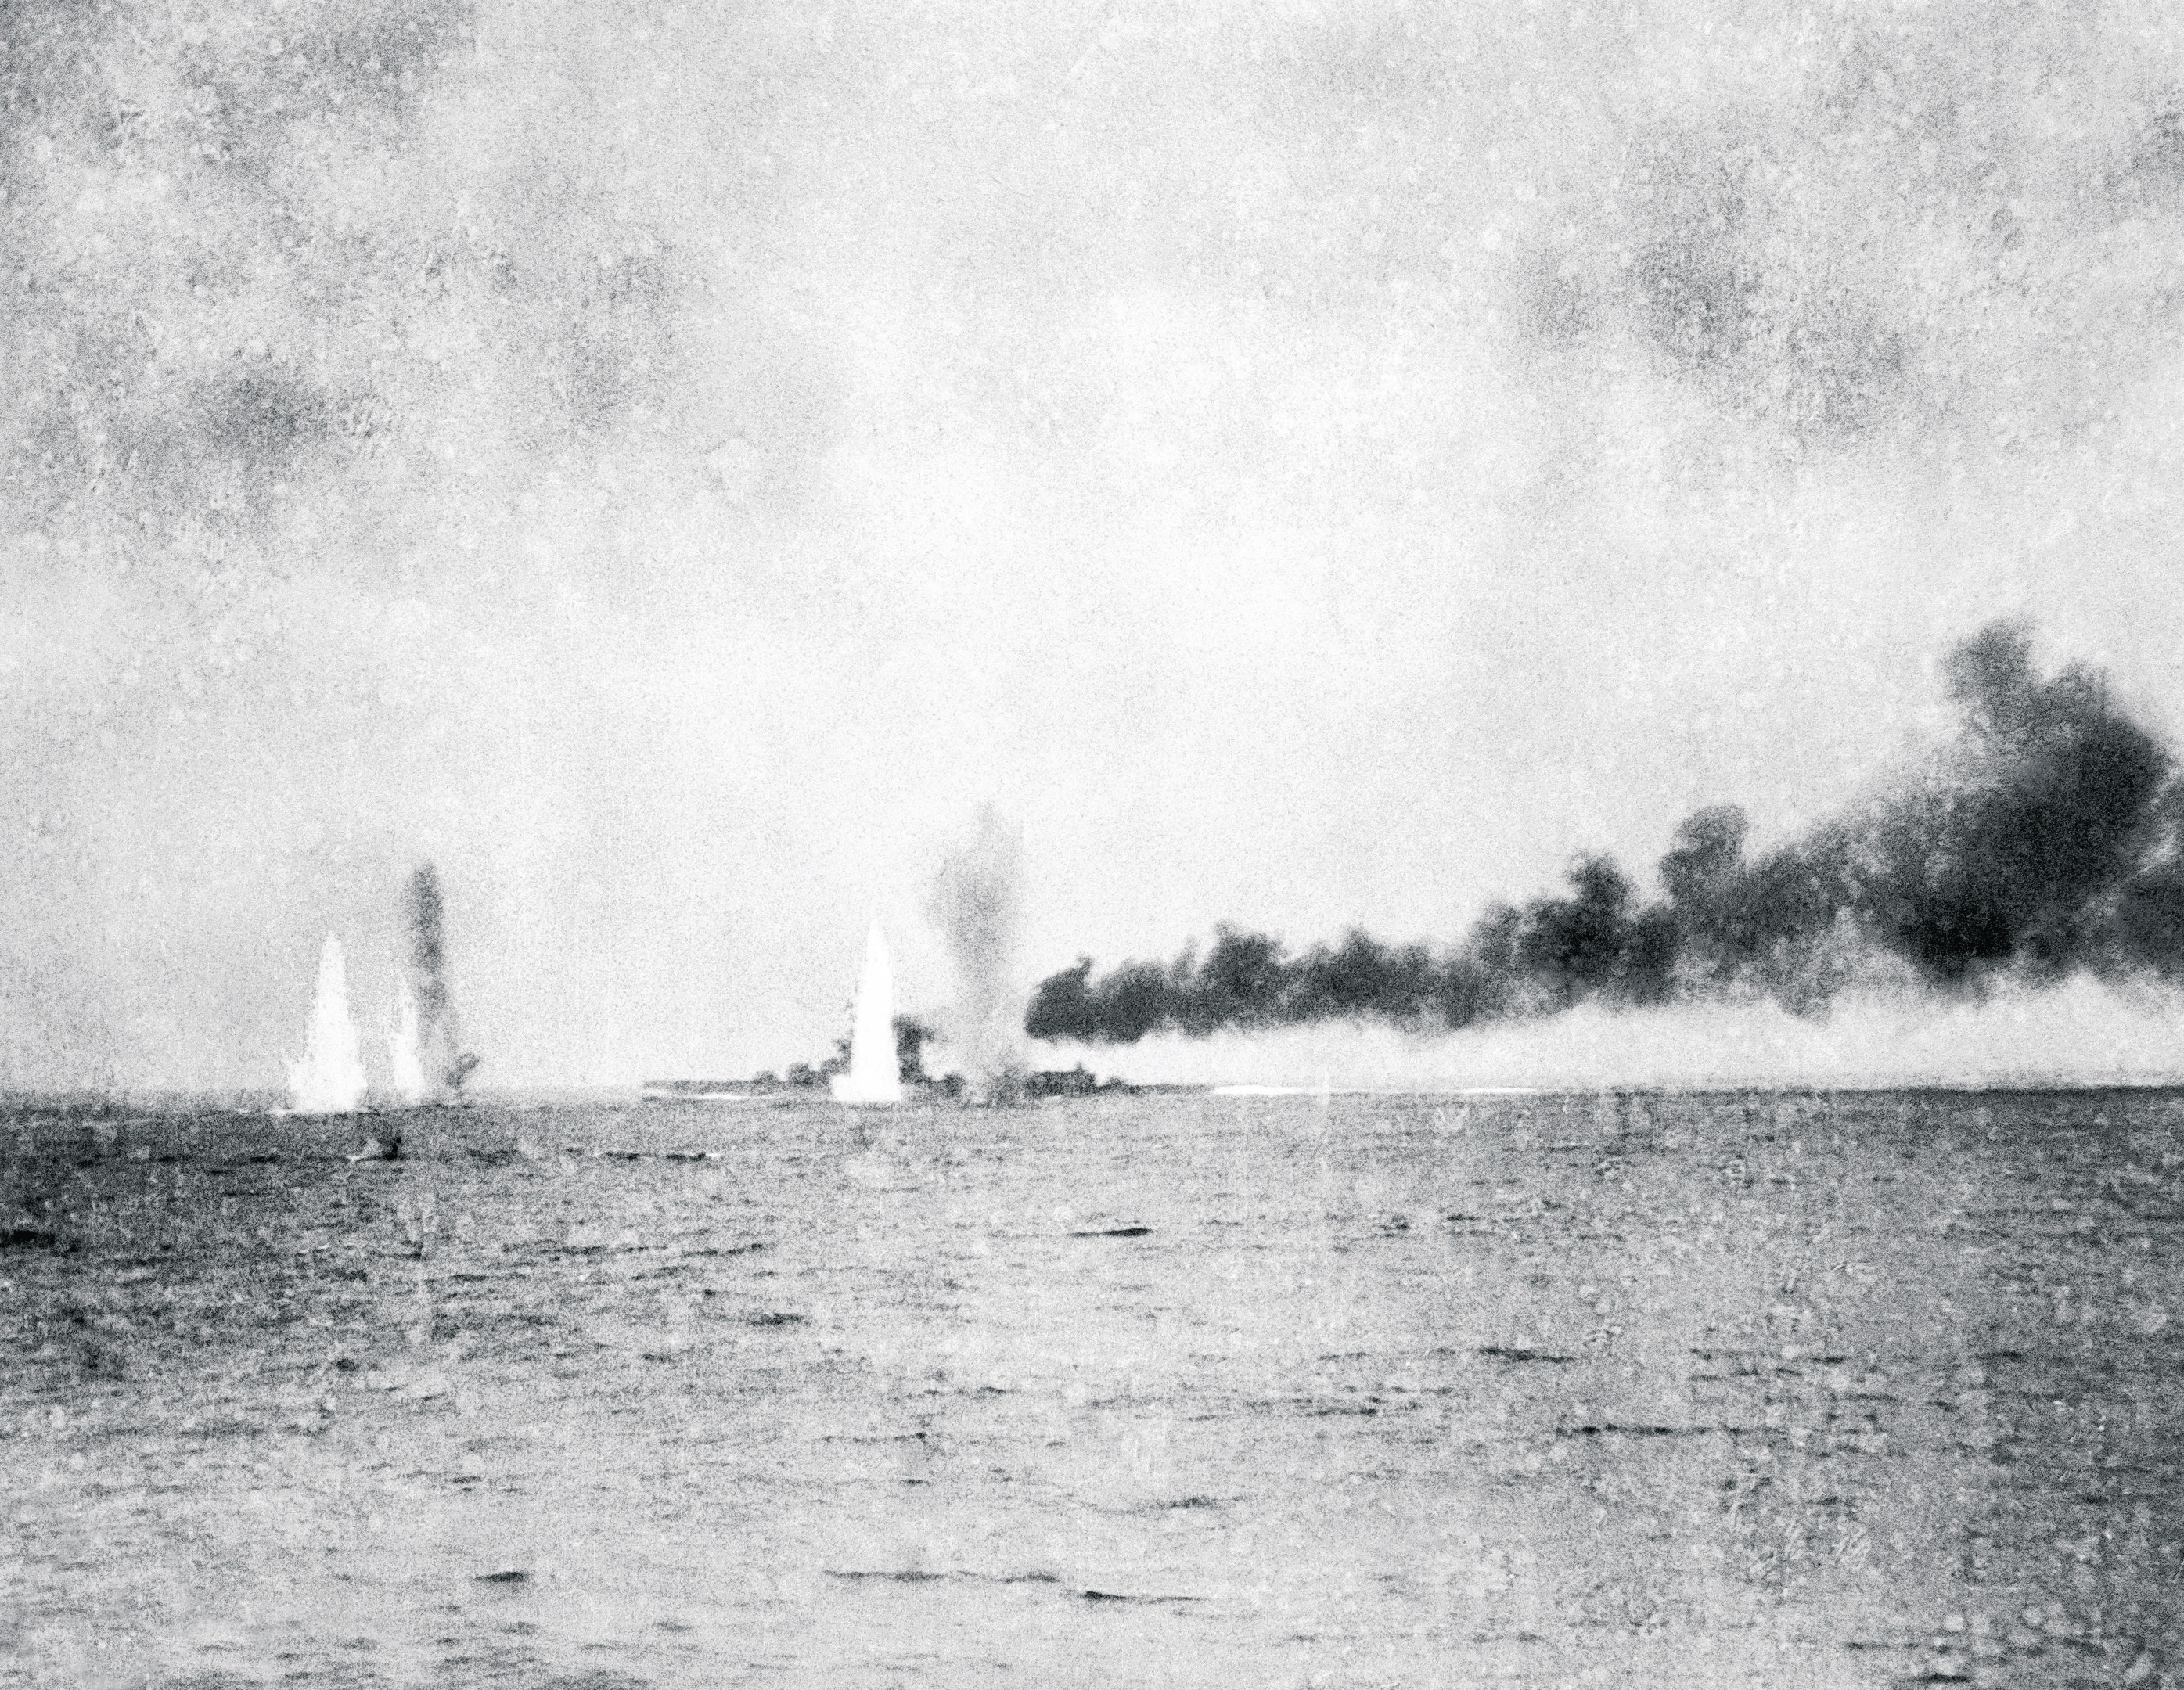 Remarkable photograph of the Battle of Jutland, taken from a British Destroyer during the action.